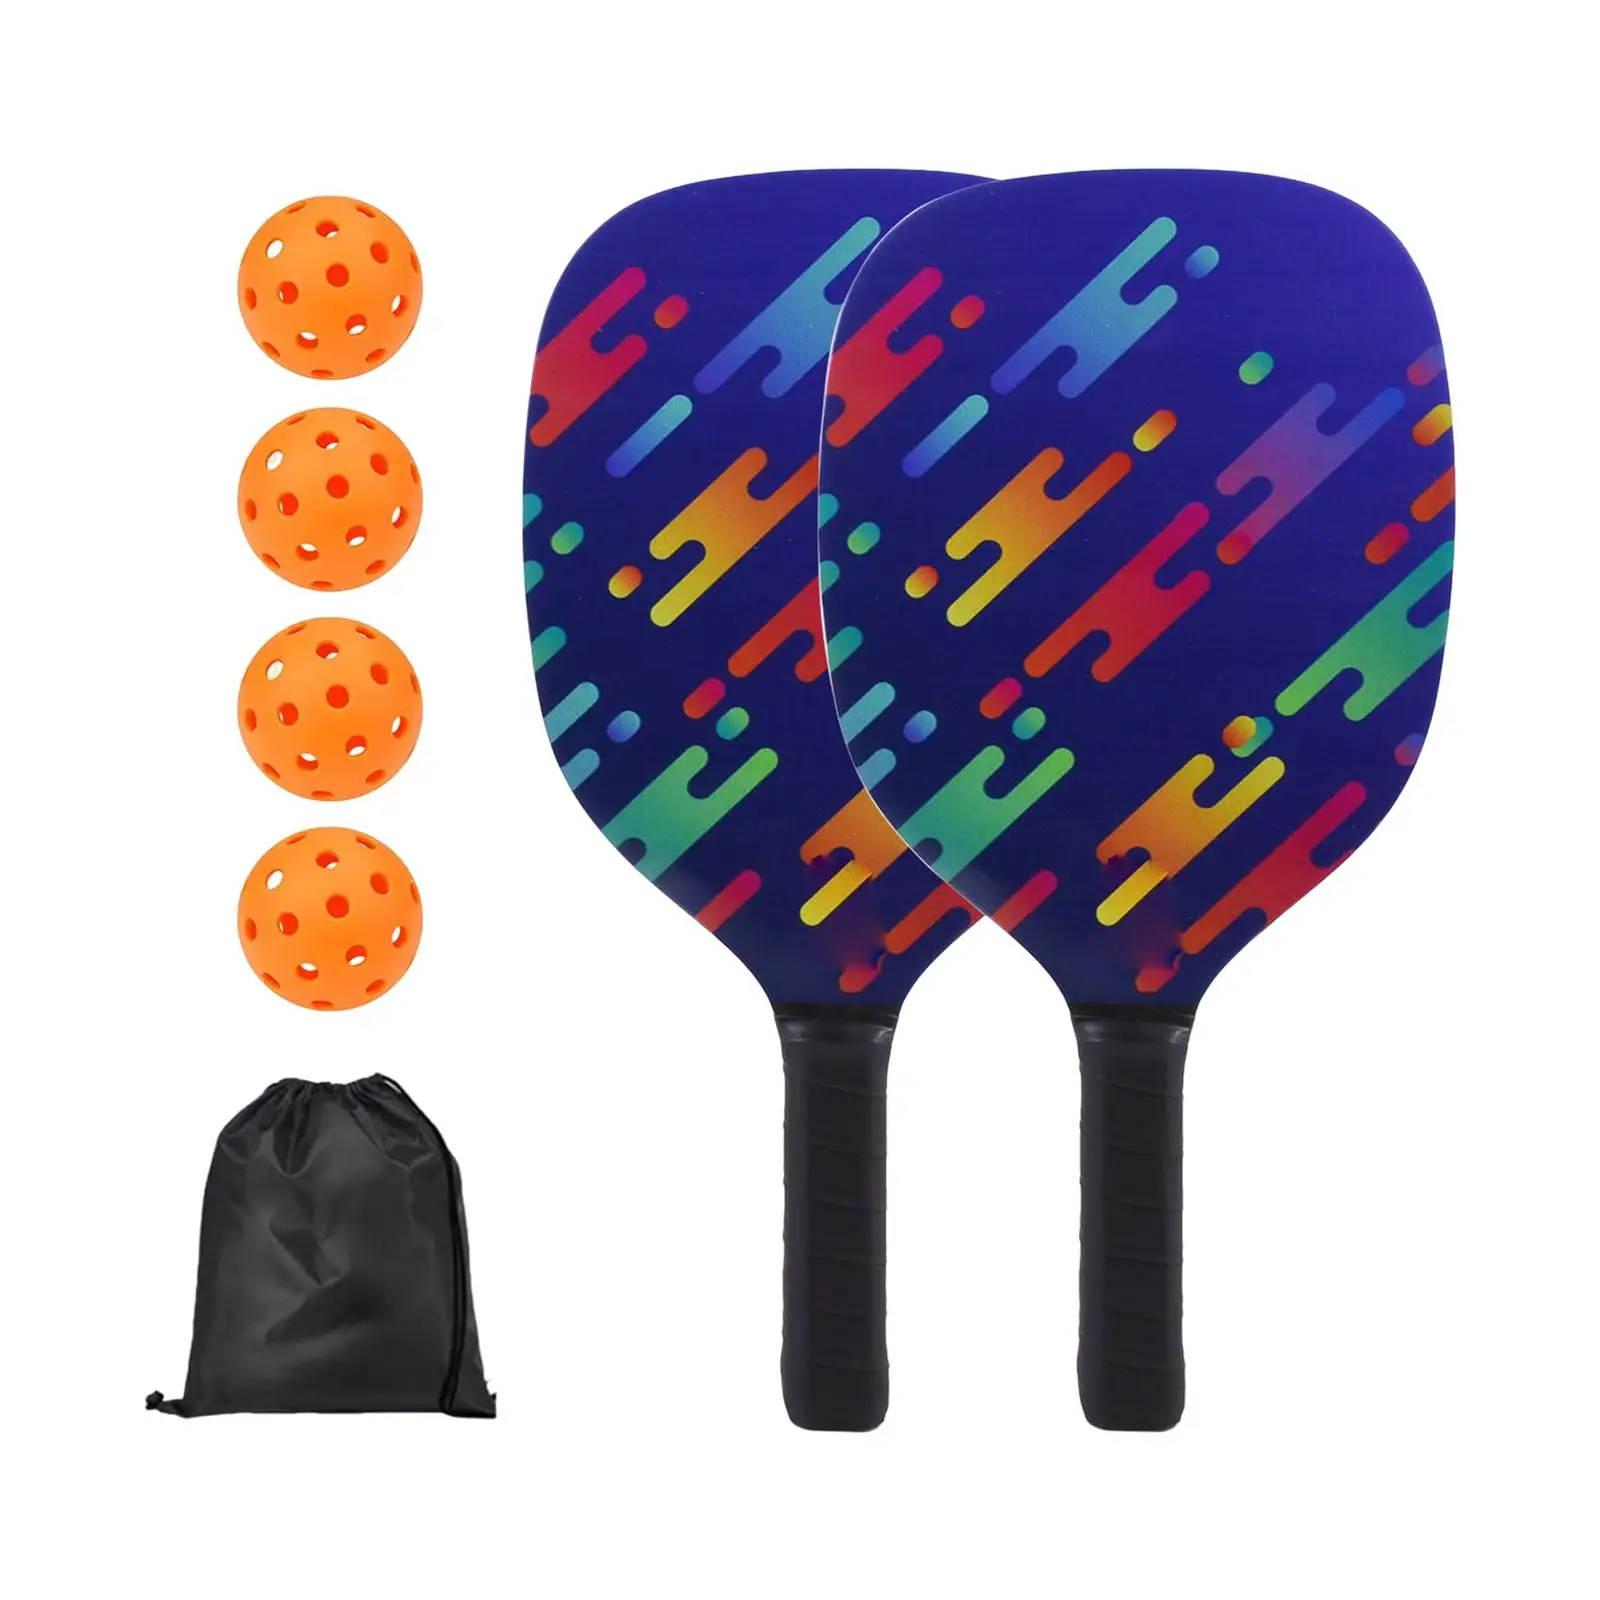 Professional Pickleball Paddle Racket 2 Rackets Carrying Bag 4 Balls Wood Lightweight for Equipment Outdoor Men Training Sports